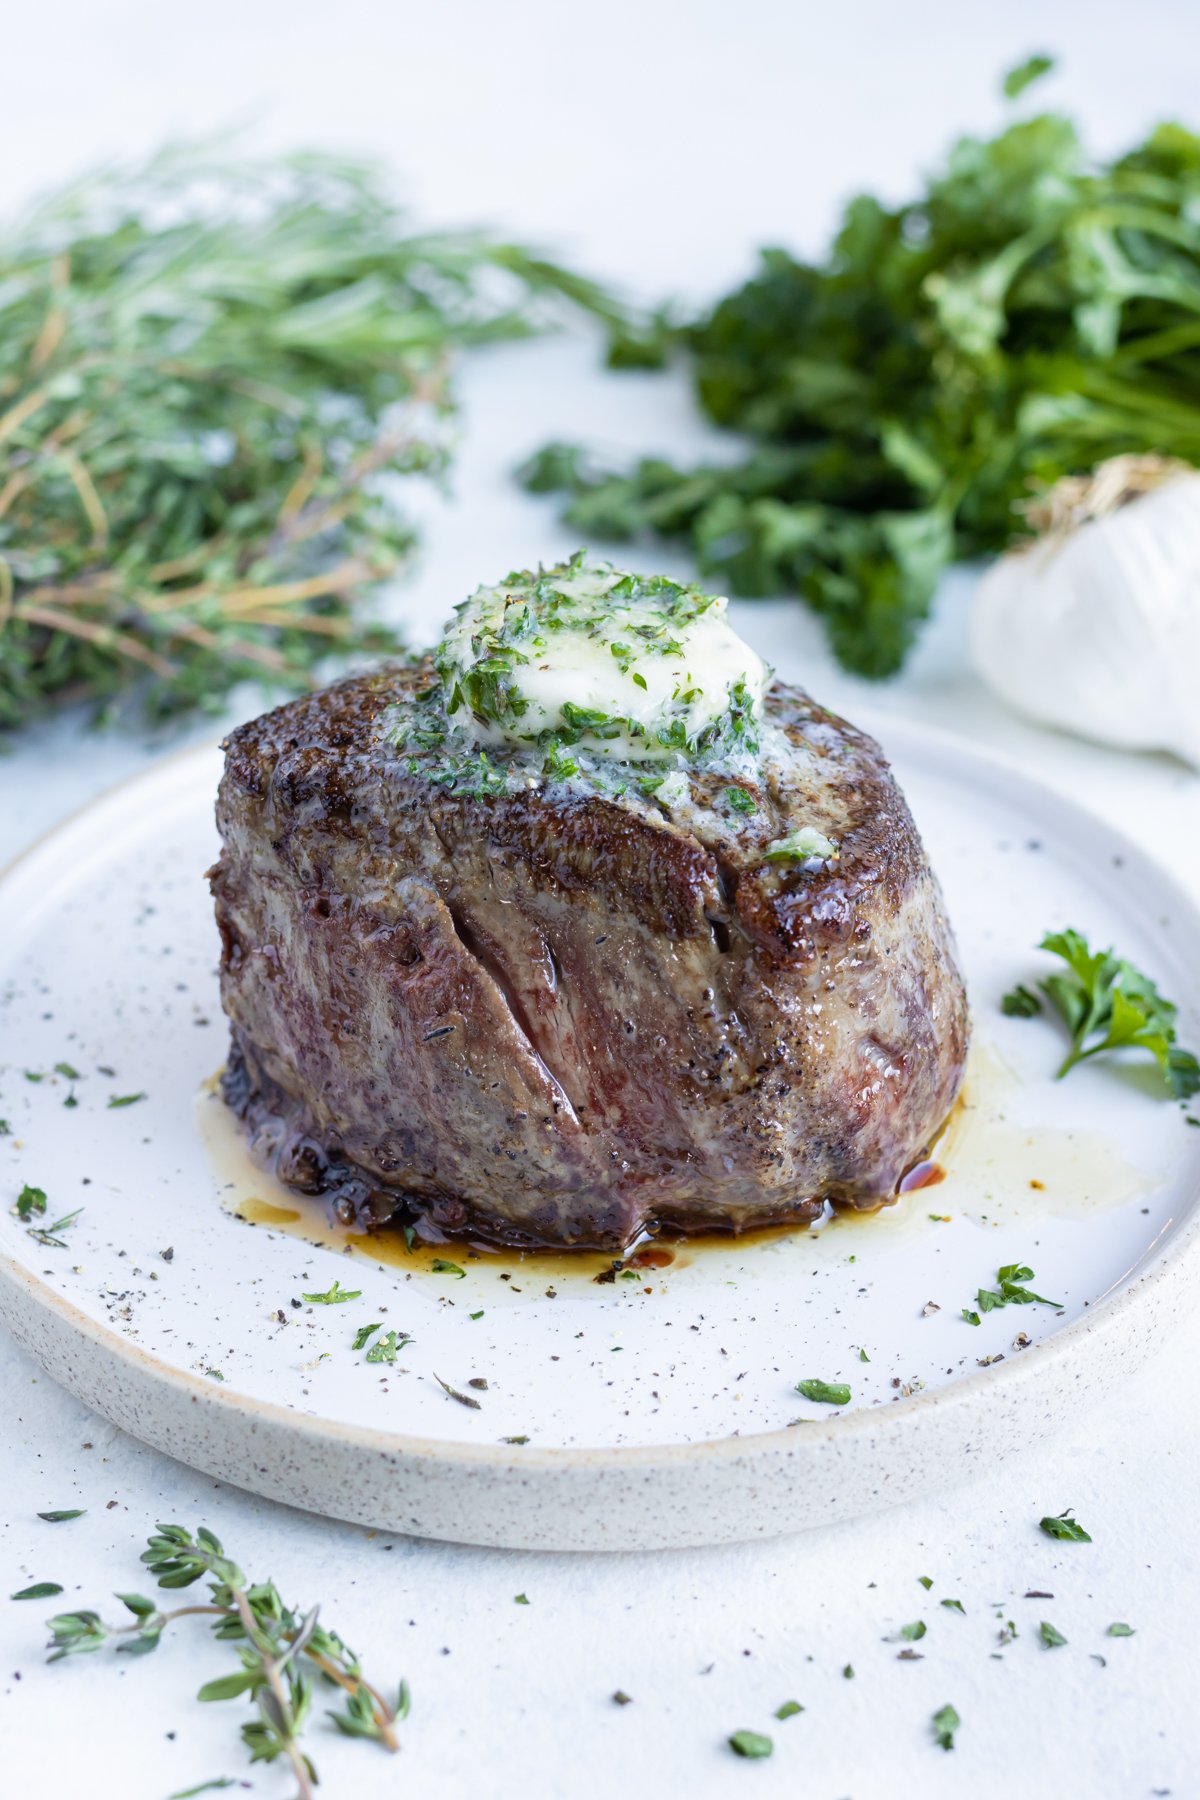 Garlic herb butter is melted on top of a steak.